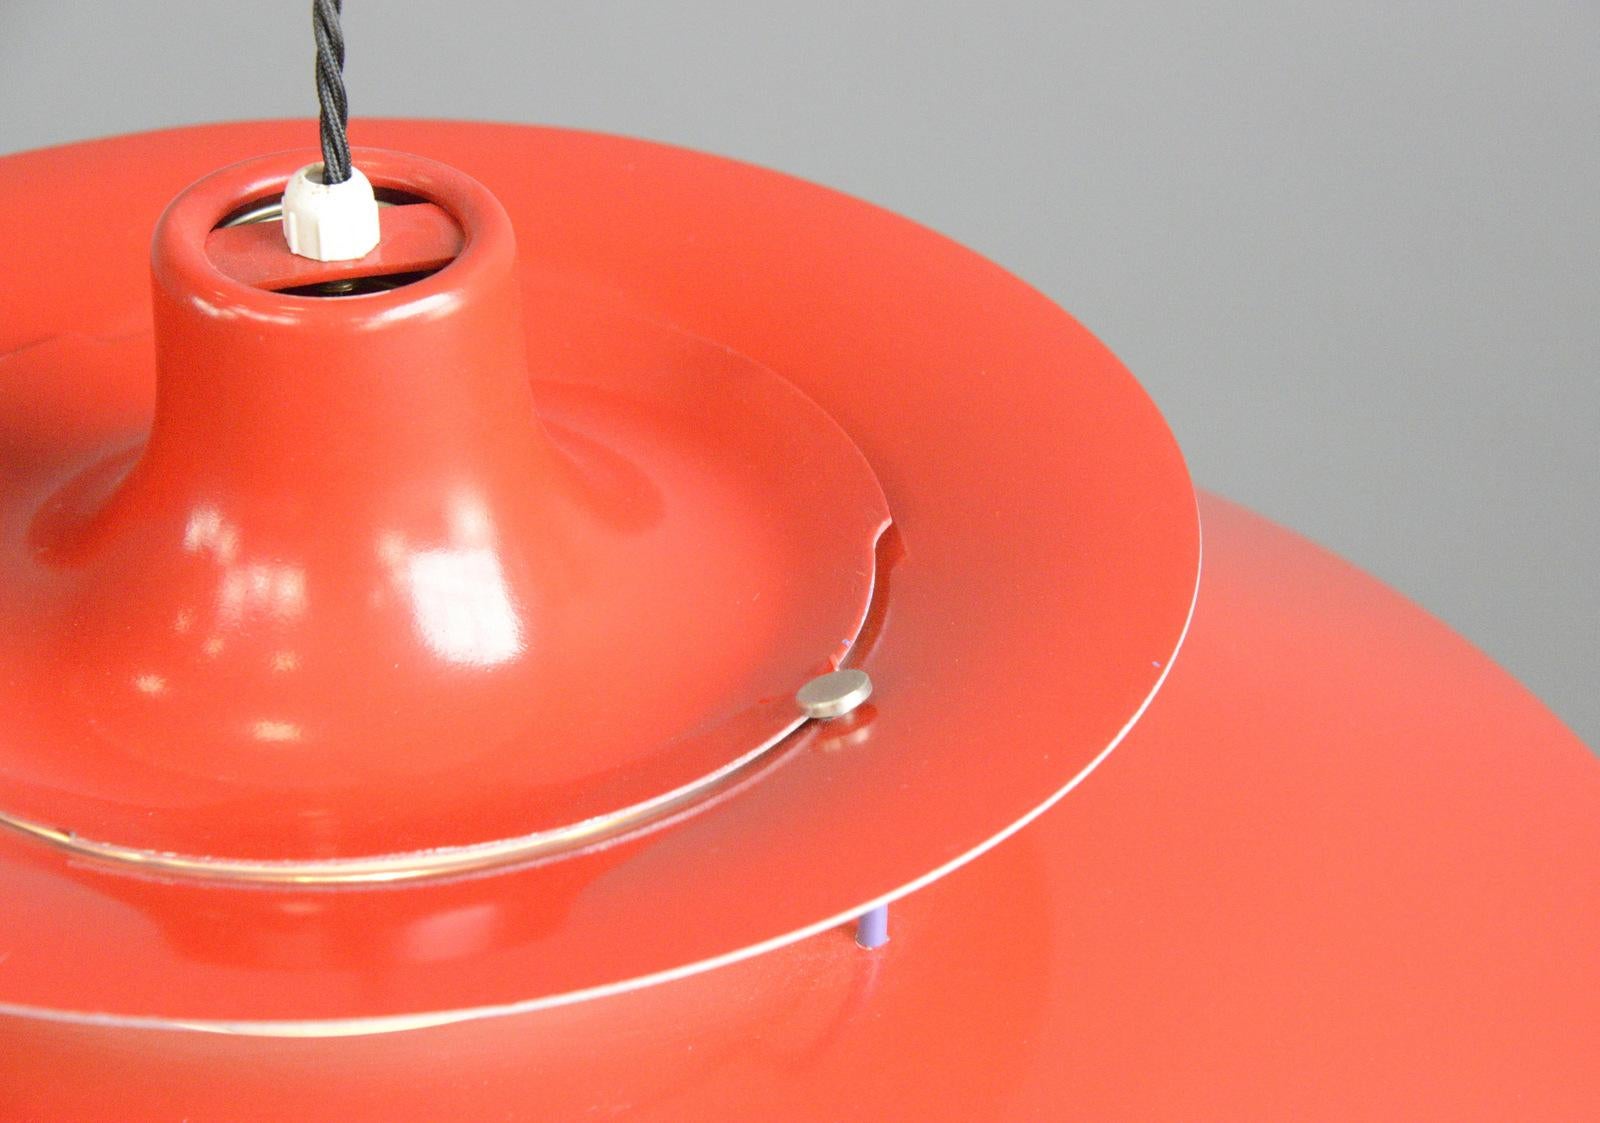 1959 red Model PH5 pendant light by Louis Poulson

- Comes with 150cm of cable
- Takes E27 fitting bulbs
- Original red paint
- Made from aluminium
- Designed by Poul Henningsen
- Made by Louis Poulson
- Model PH5
- Danish, 1959
-